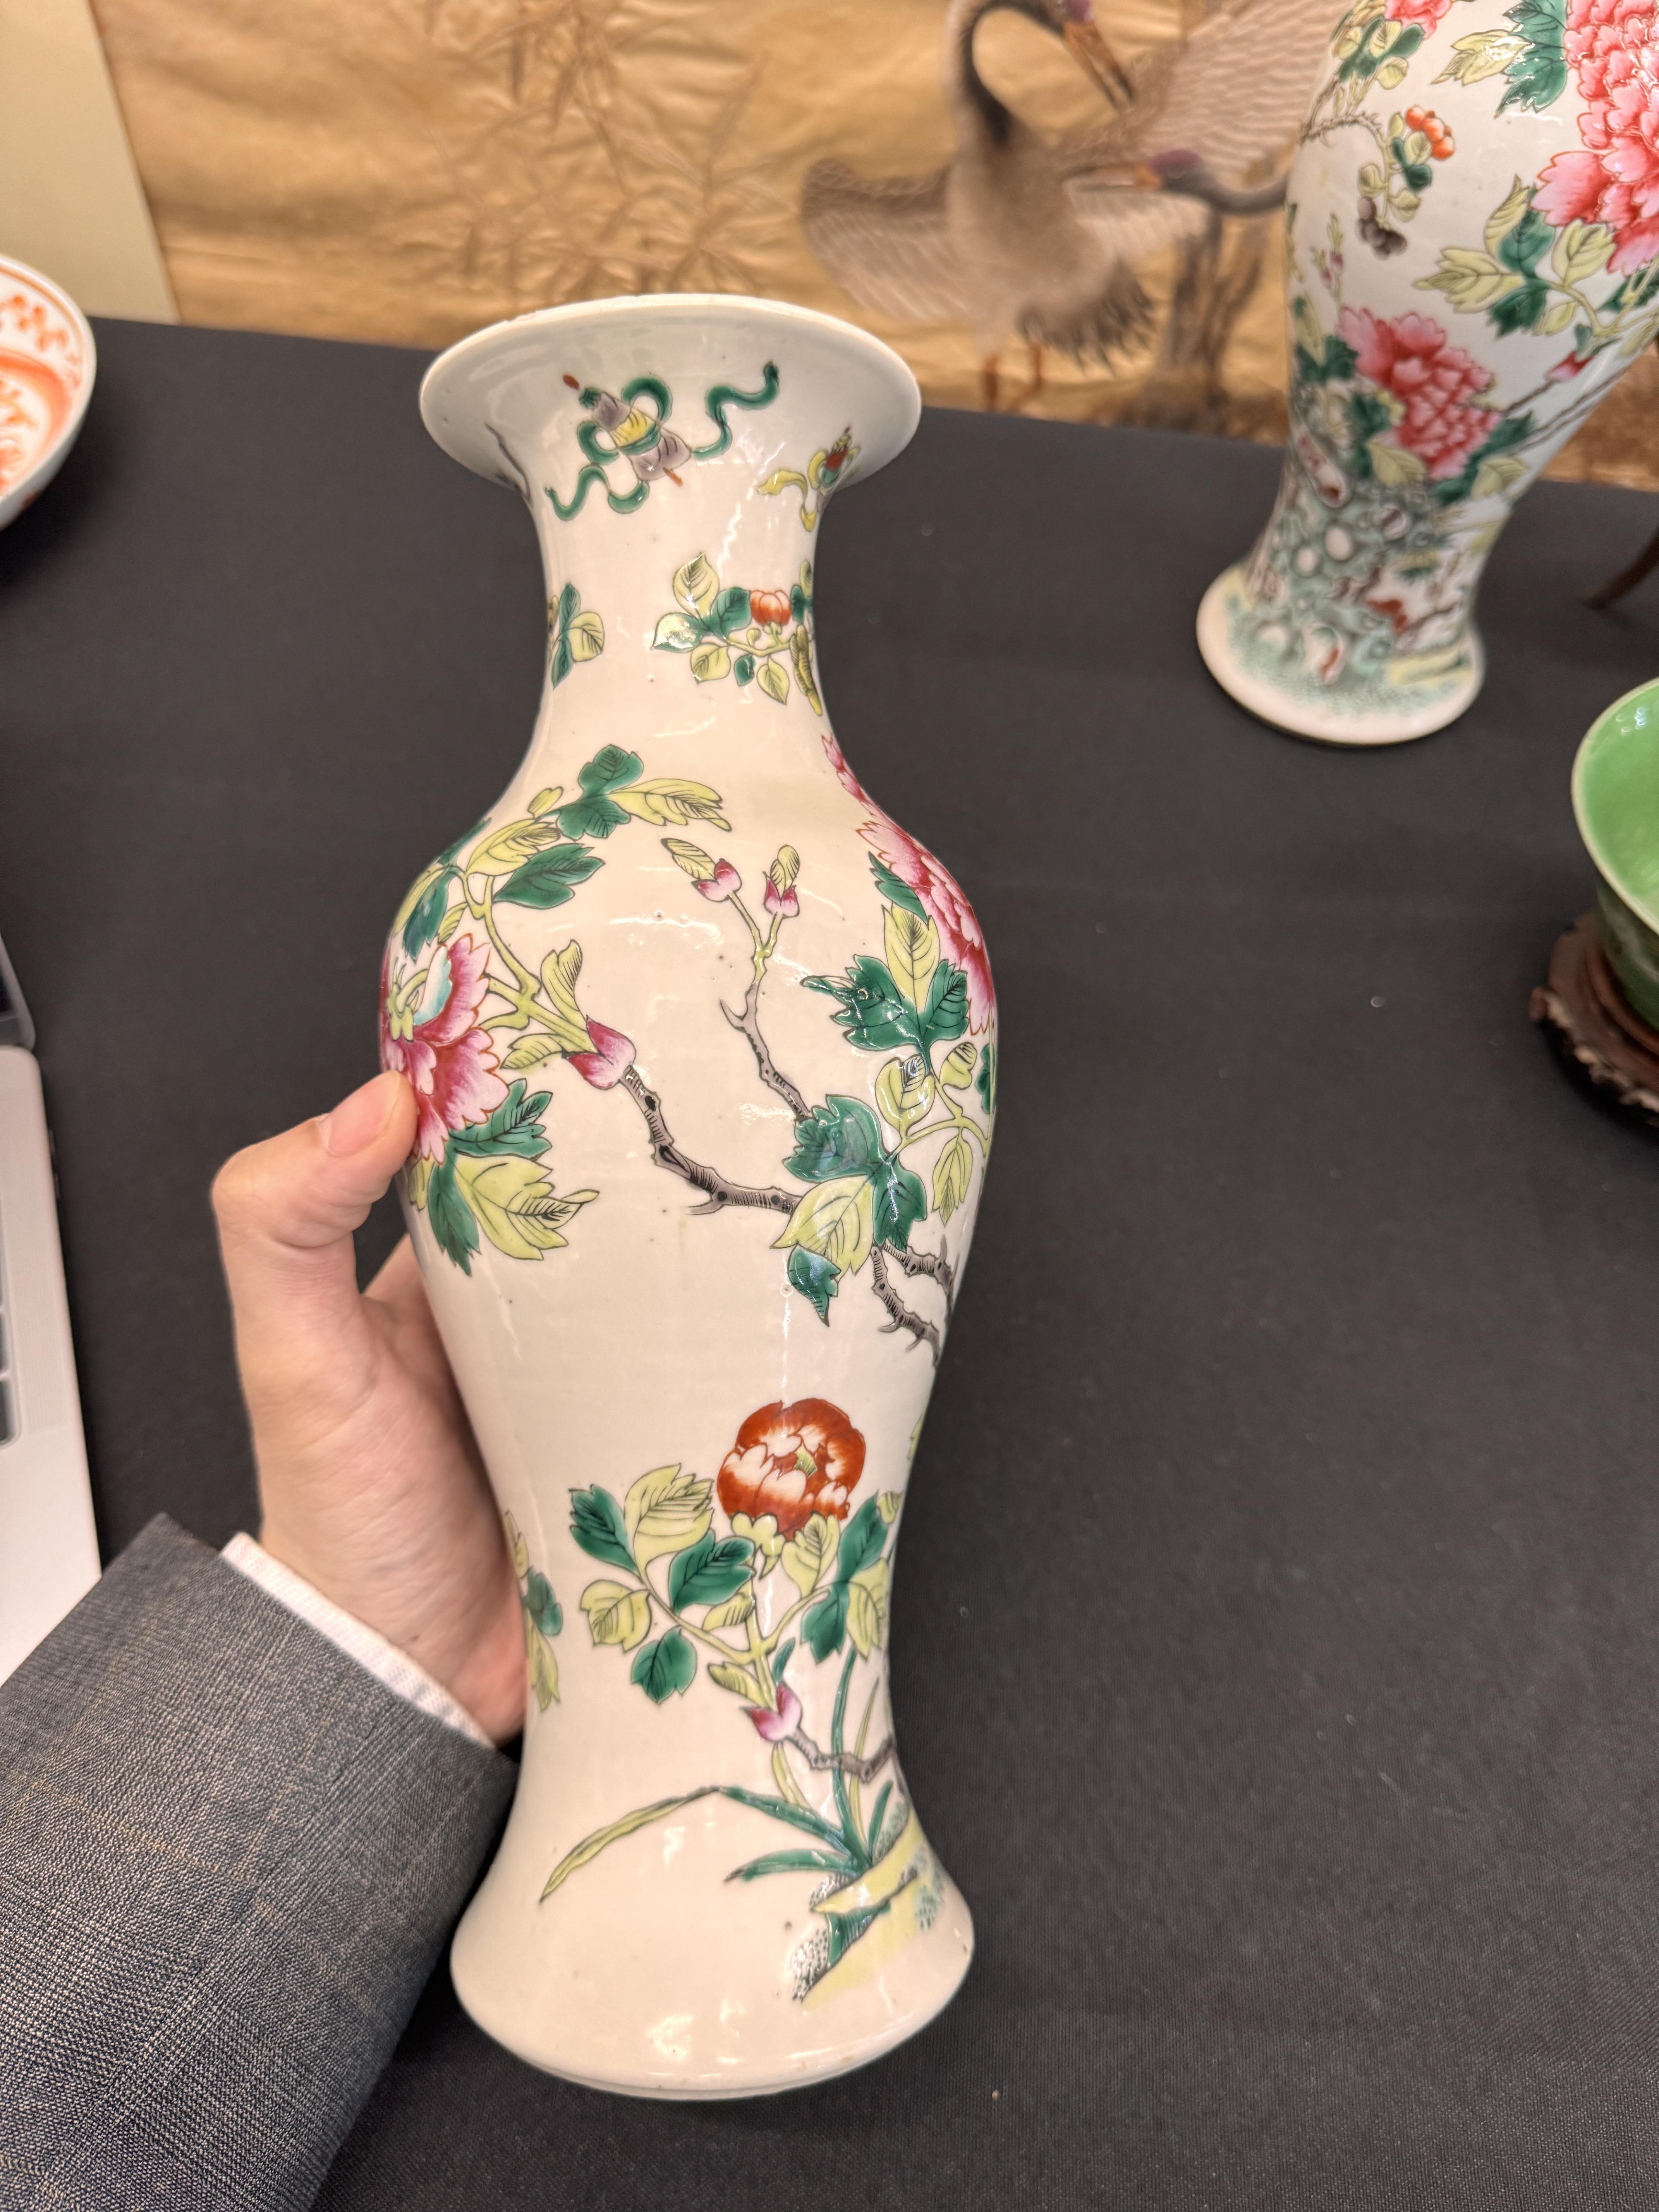 A PAIR OF CHINESE FAMILLE-ROSE 'PEONY' VASES 清 十九或二十世紀 粉彩牡丹紋瓶一對 - Image 13 of 19